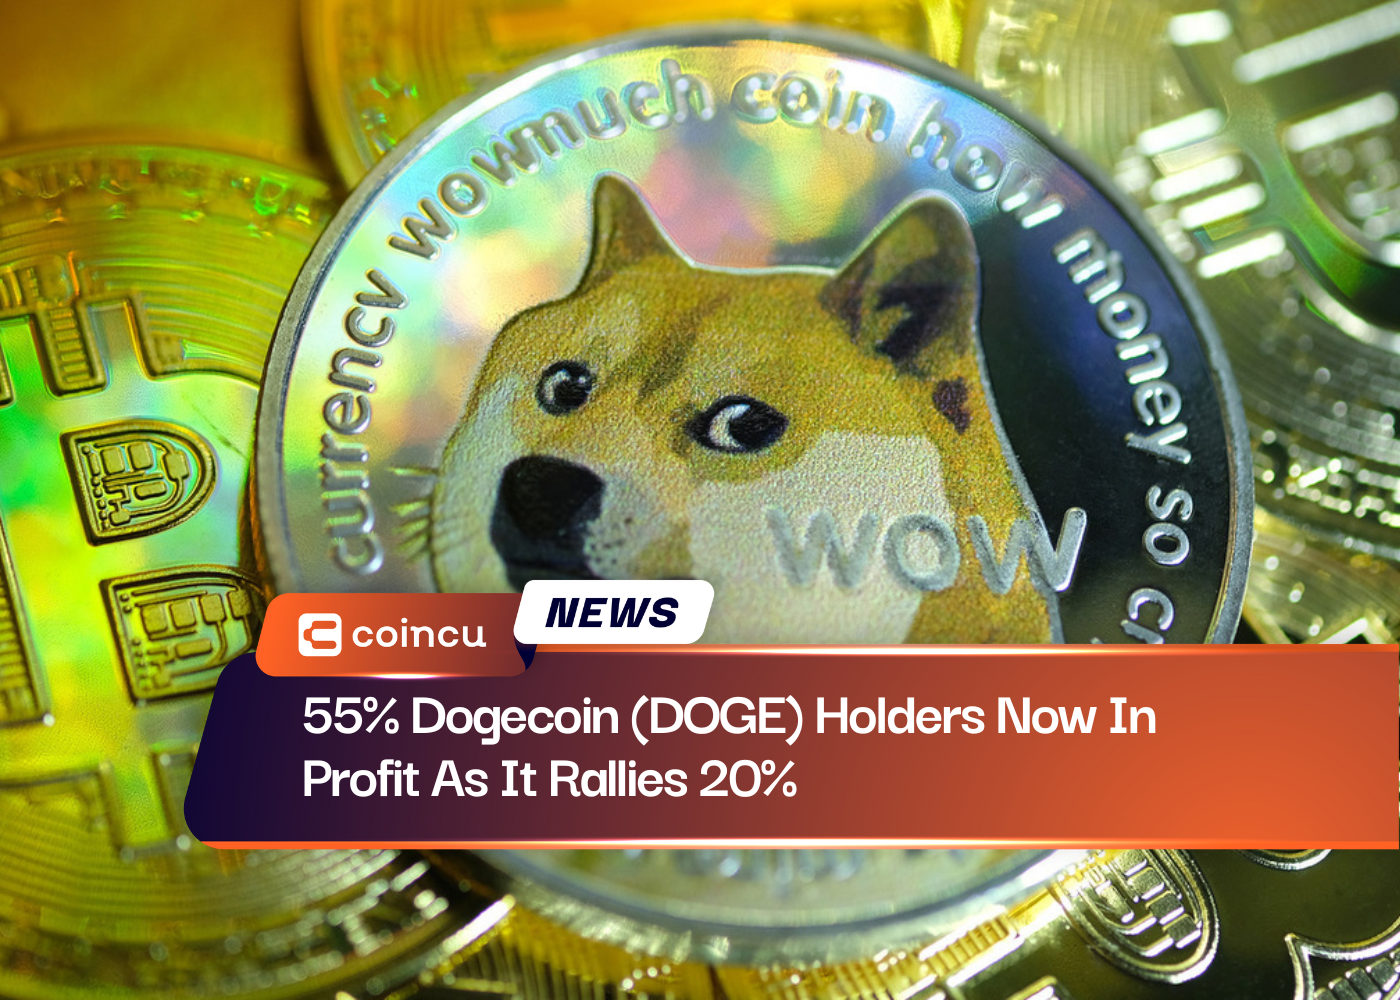 55% Dogecoin (DOGE) Holders Now In Profit As It Rallies 20%